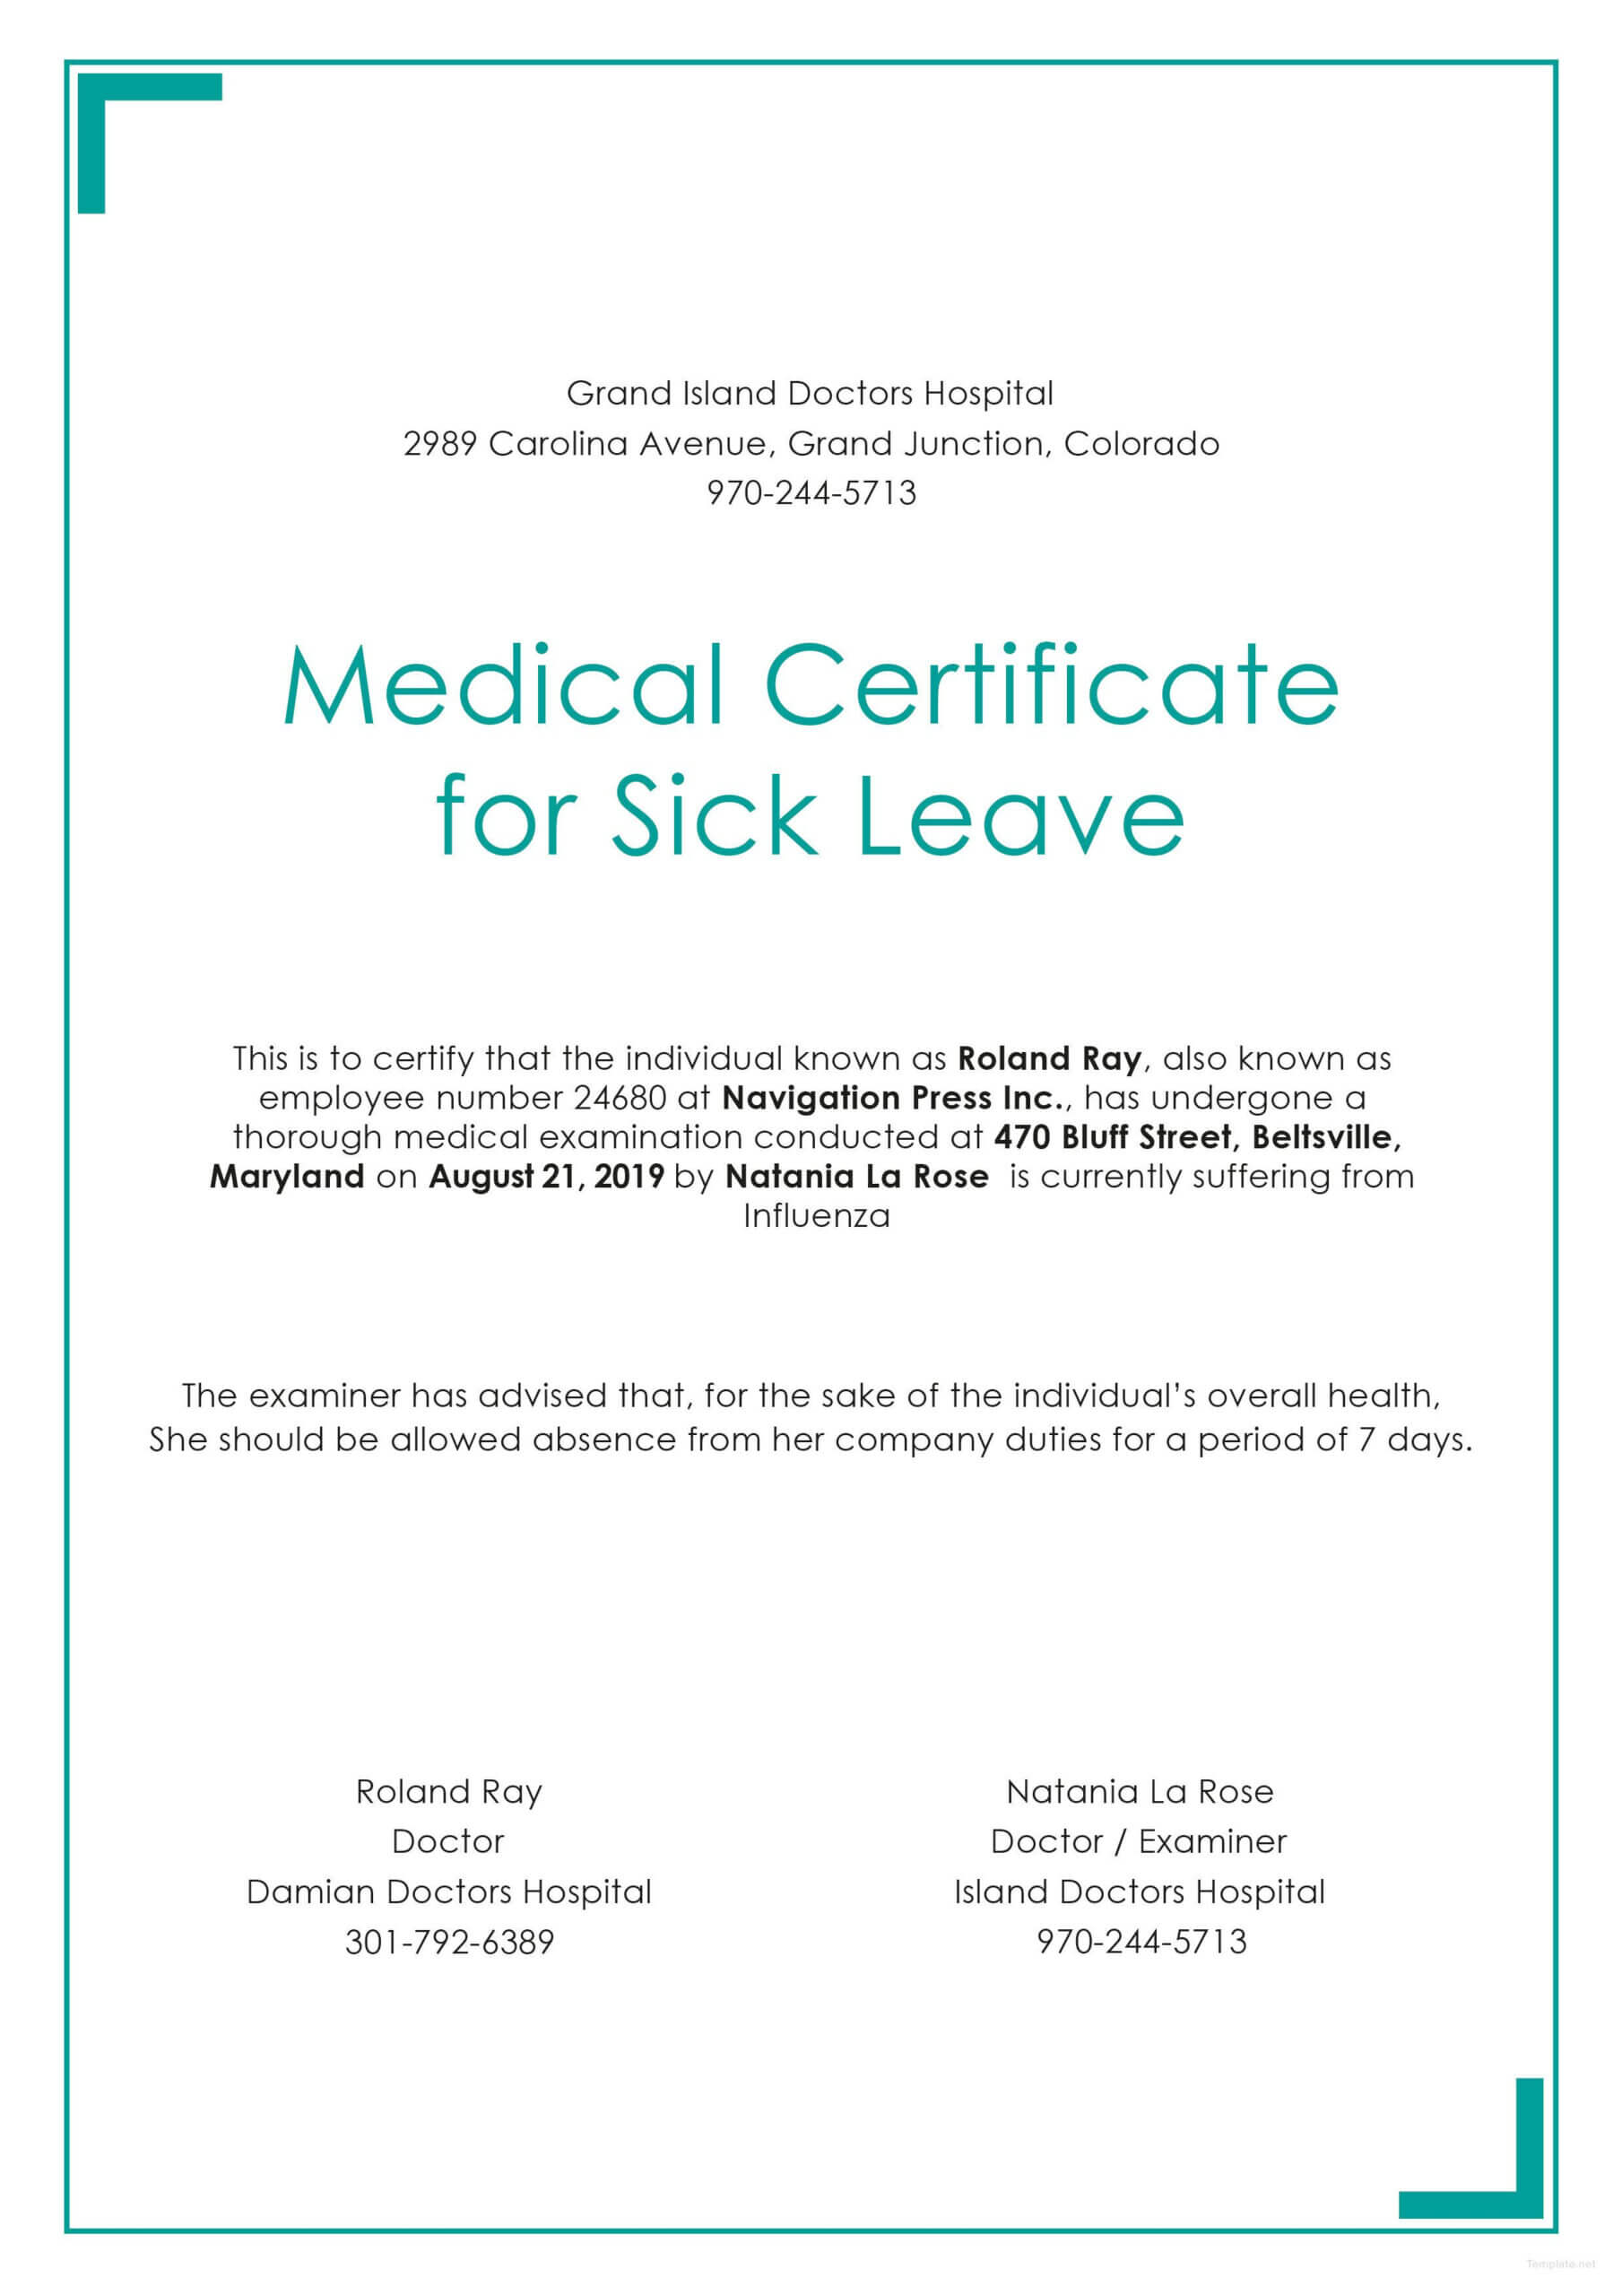 Free Medical Certificate For Sick Leave | Medical With Free Fake Medical Certificate Template